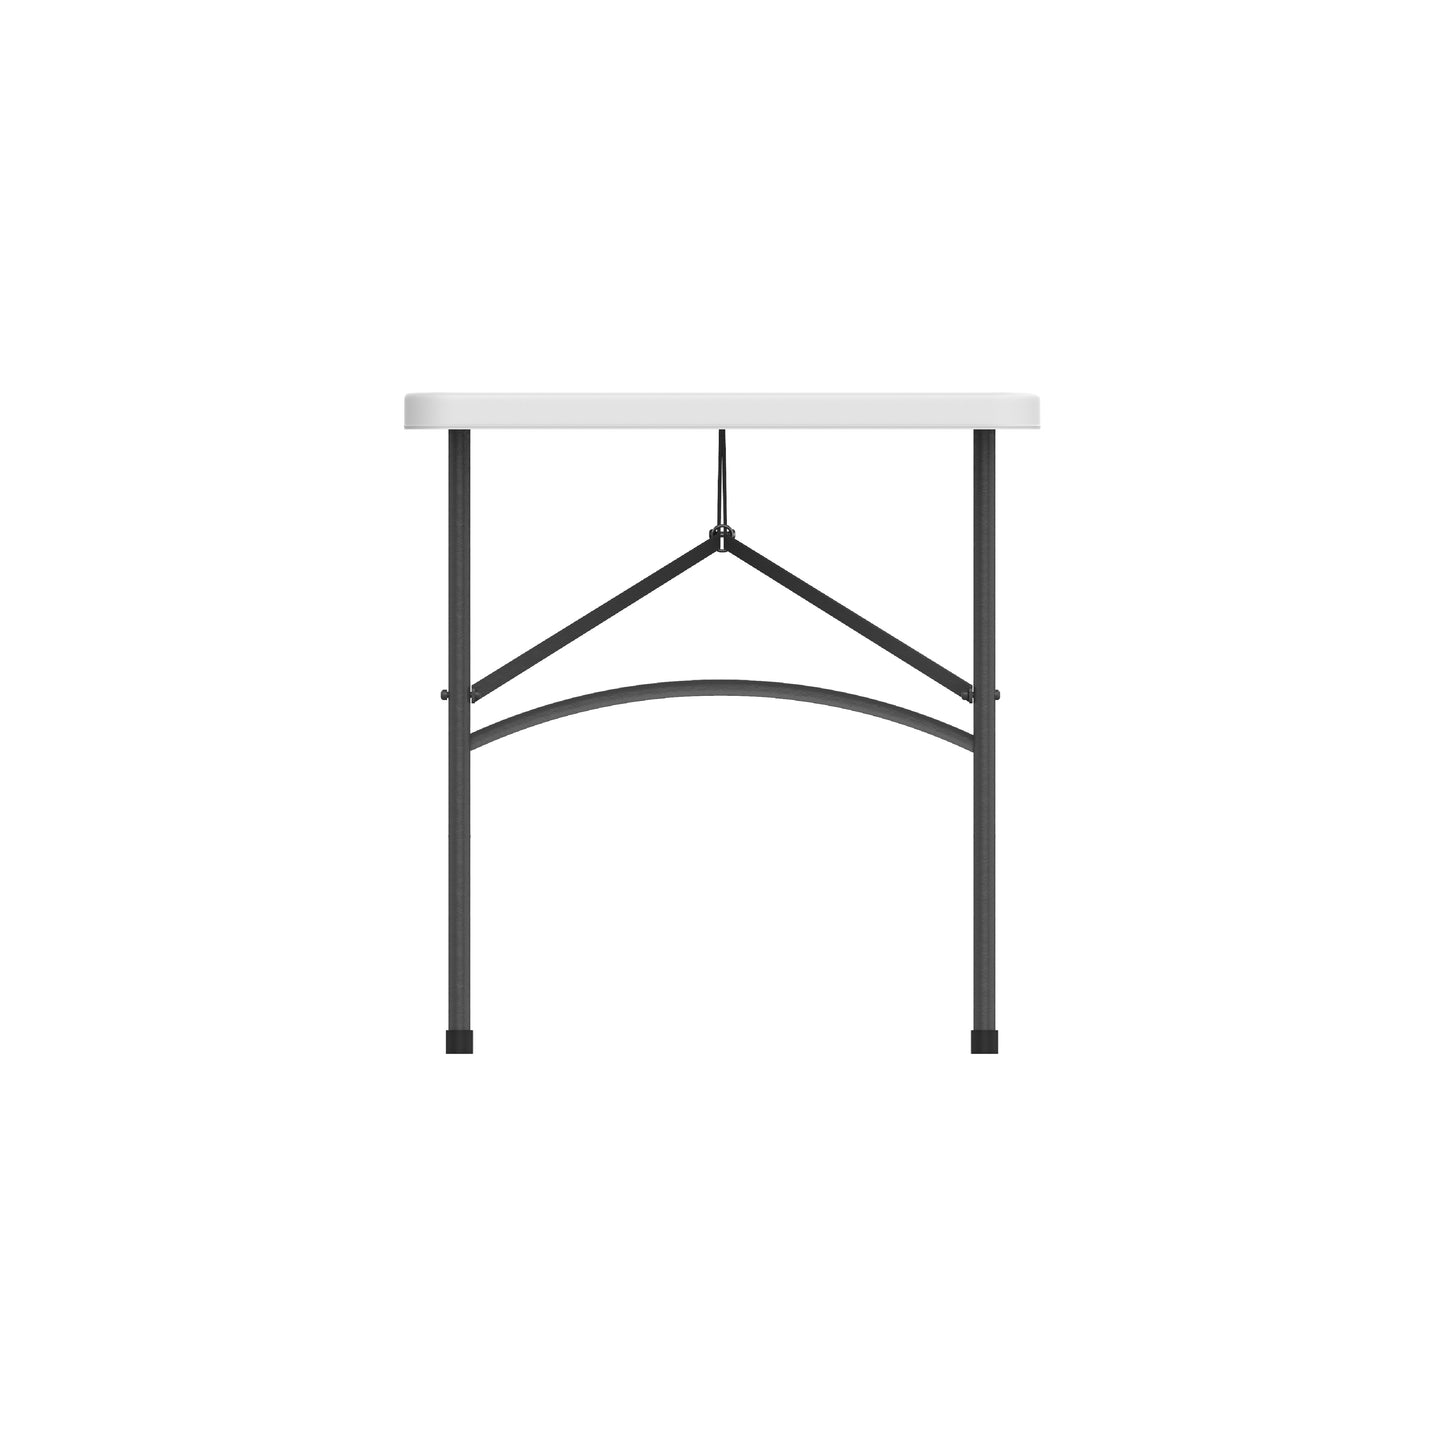 152 cm Folding Picnic Table with Steel Legs